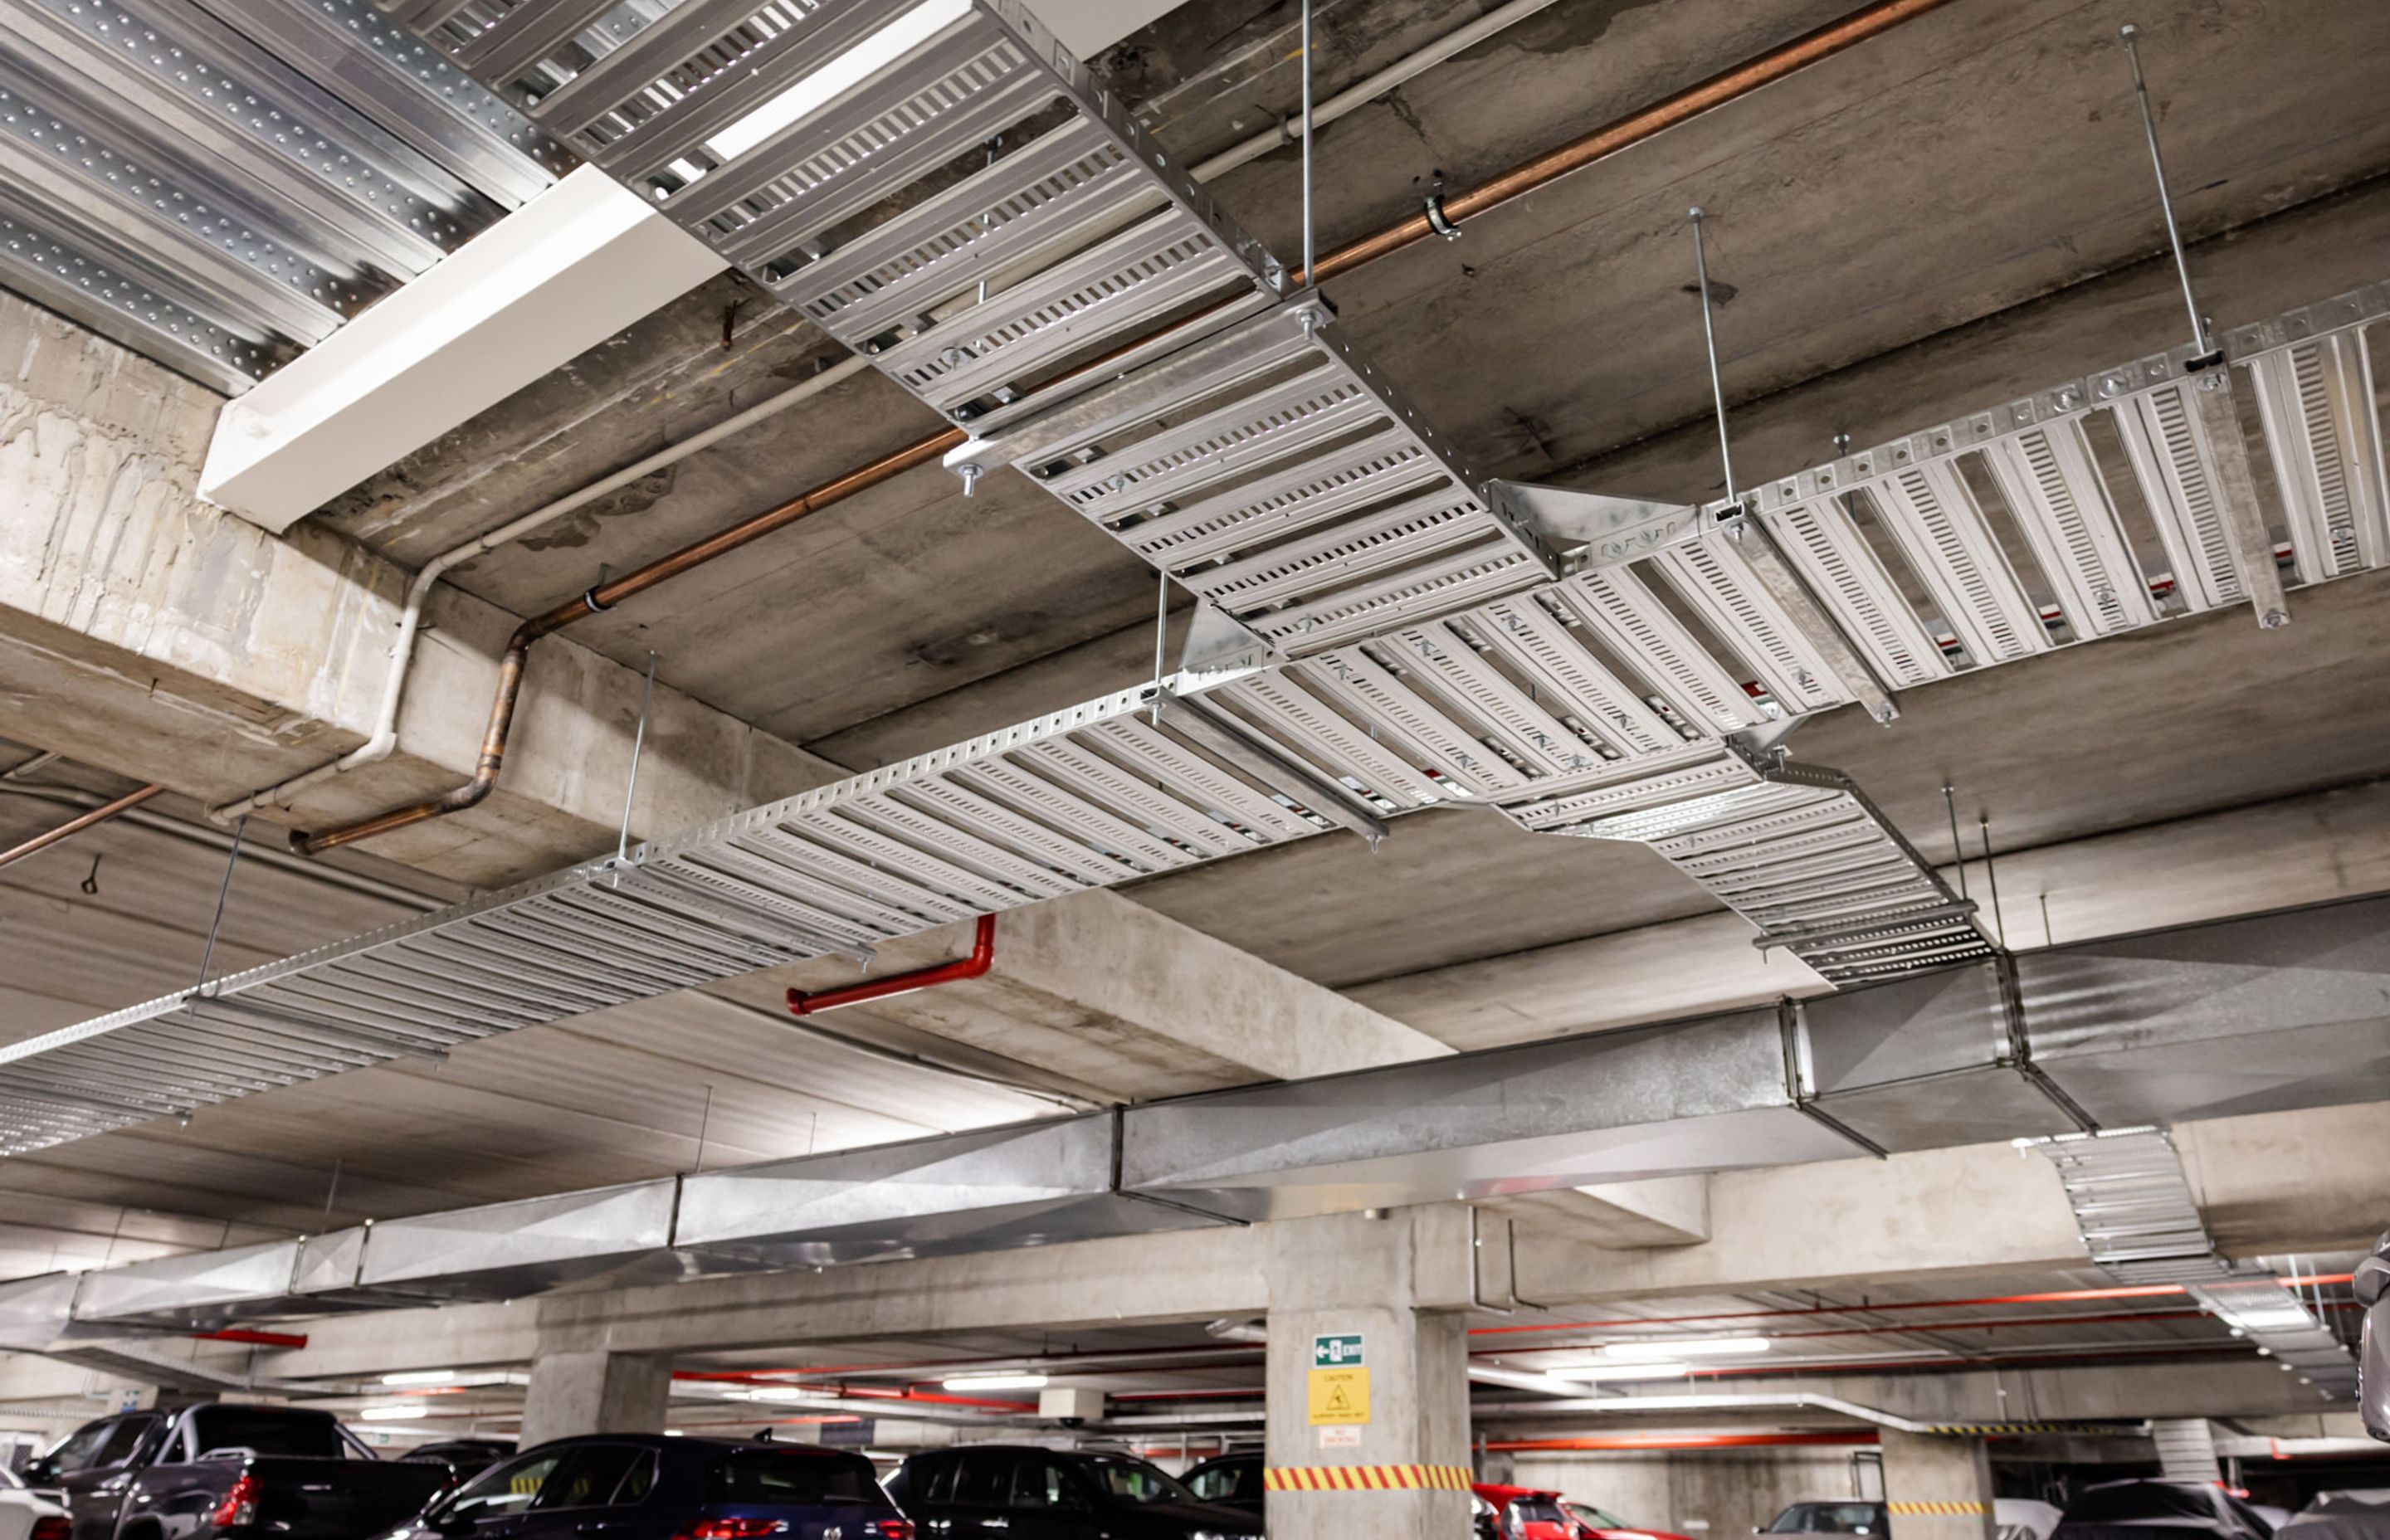 Dedicated cable trays are installed to distribute the EV charger cables throughout the carpark.